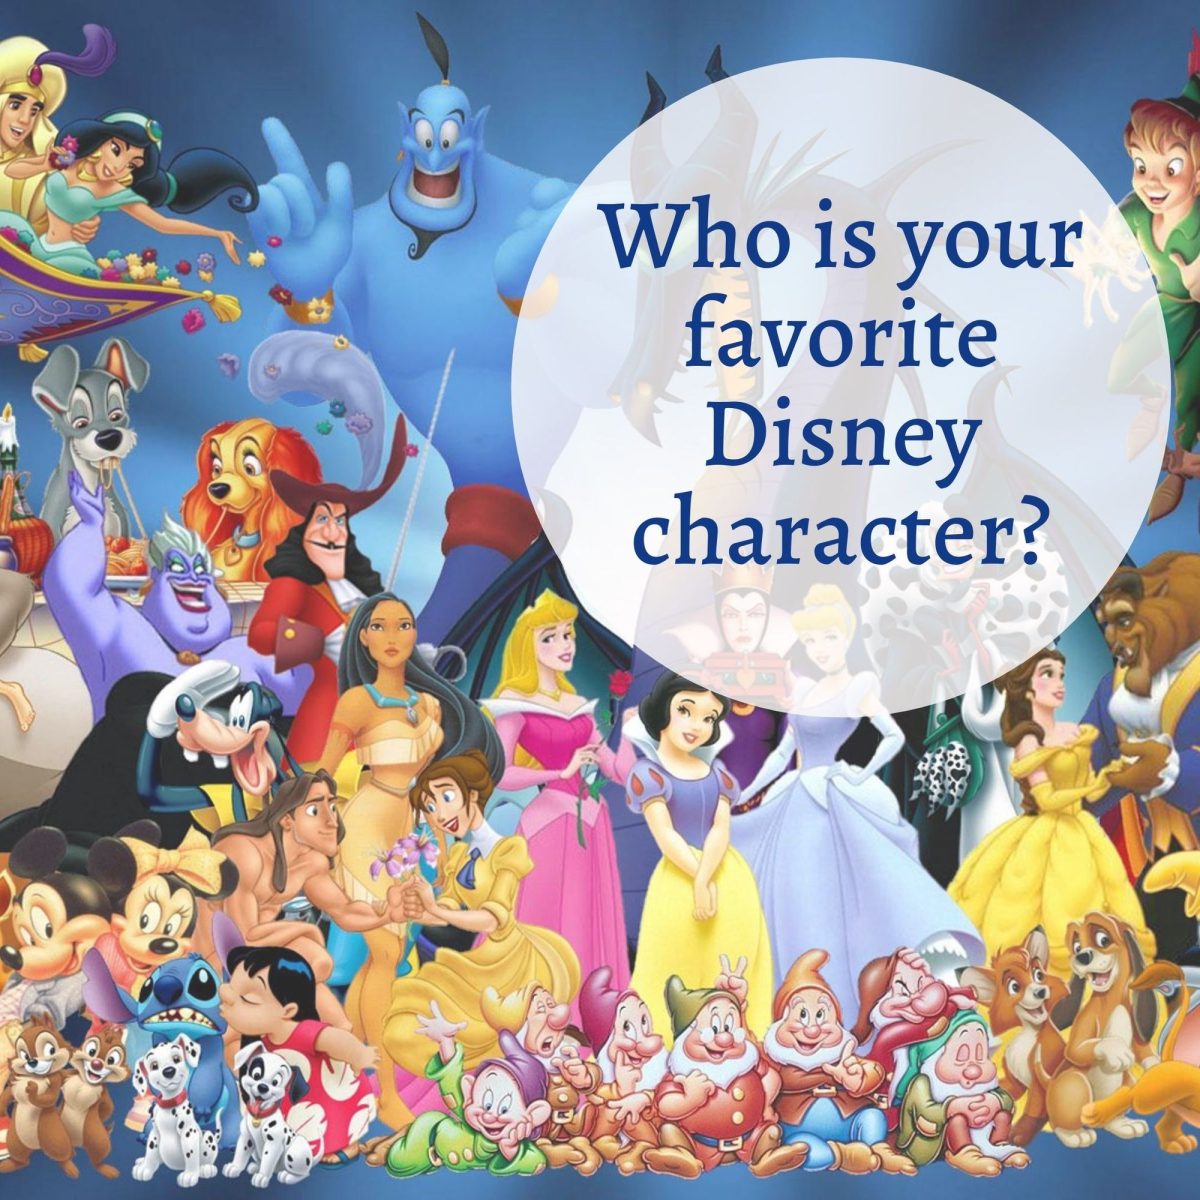 Who+is+Your+Favorite+Disney+Character%3F